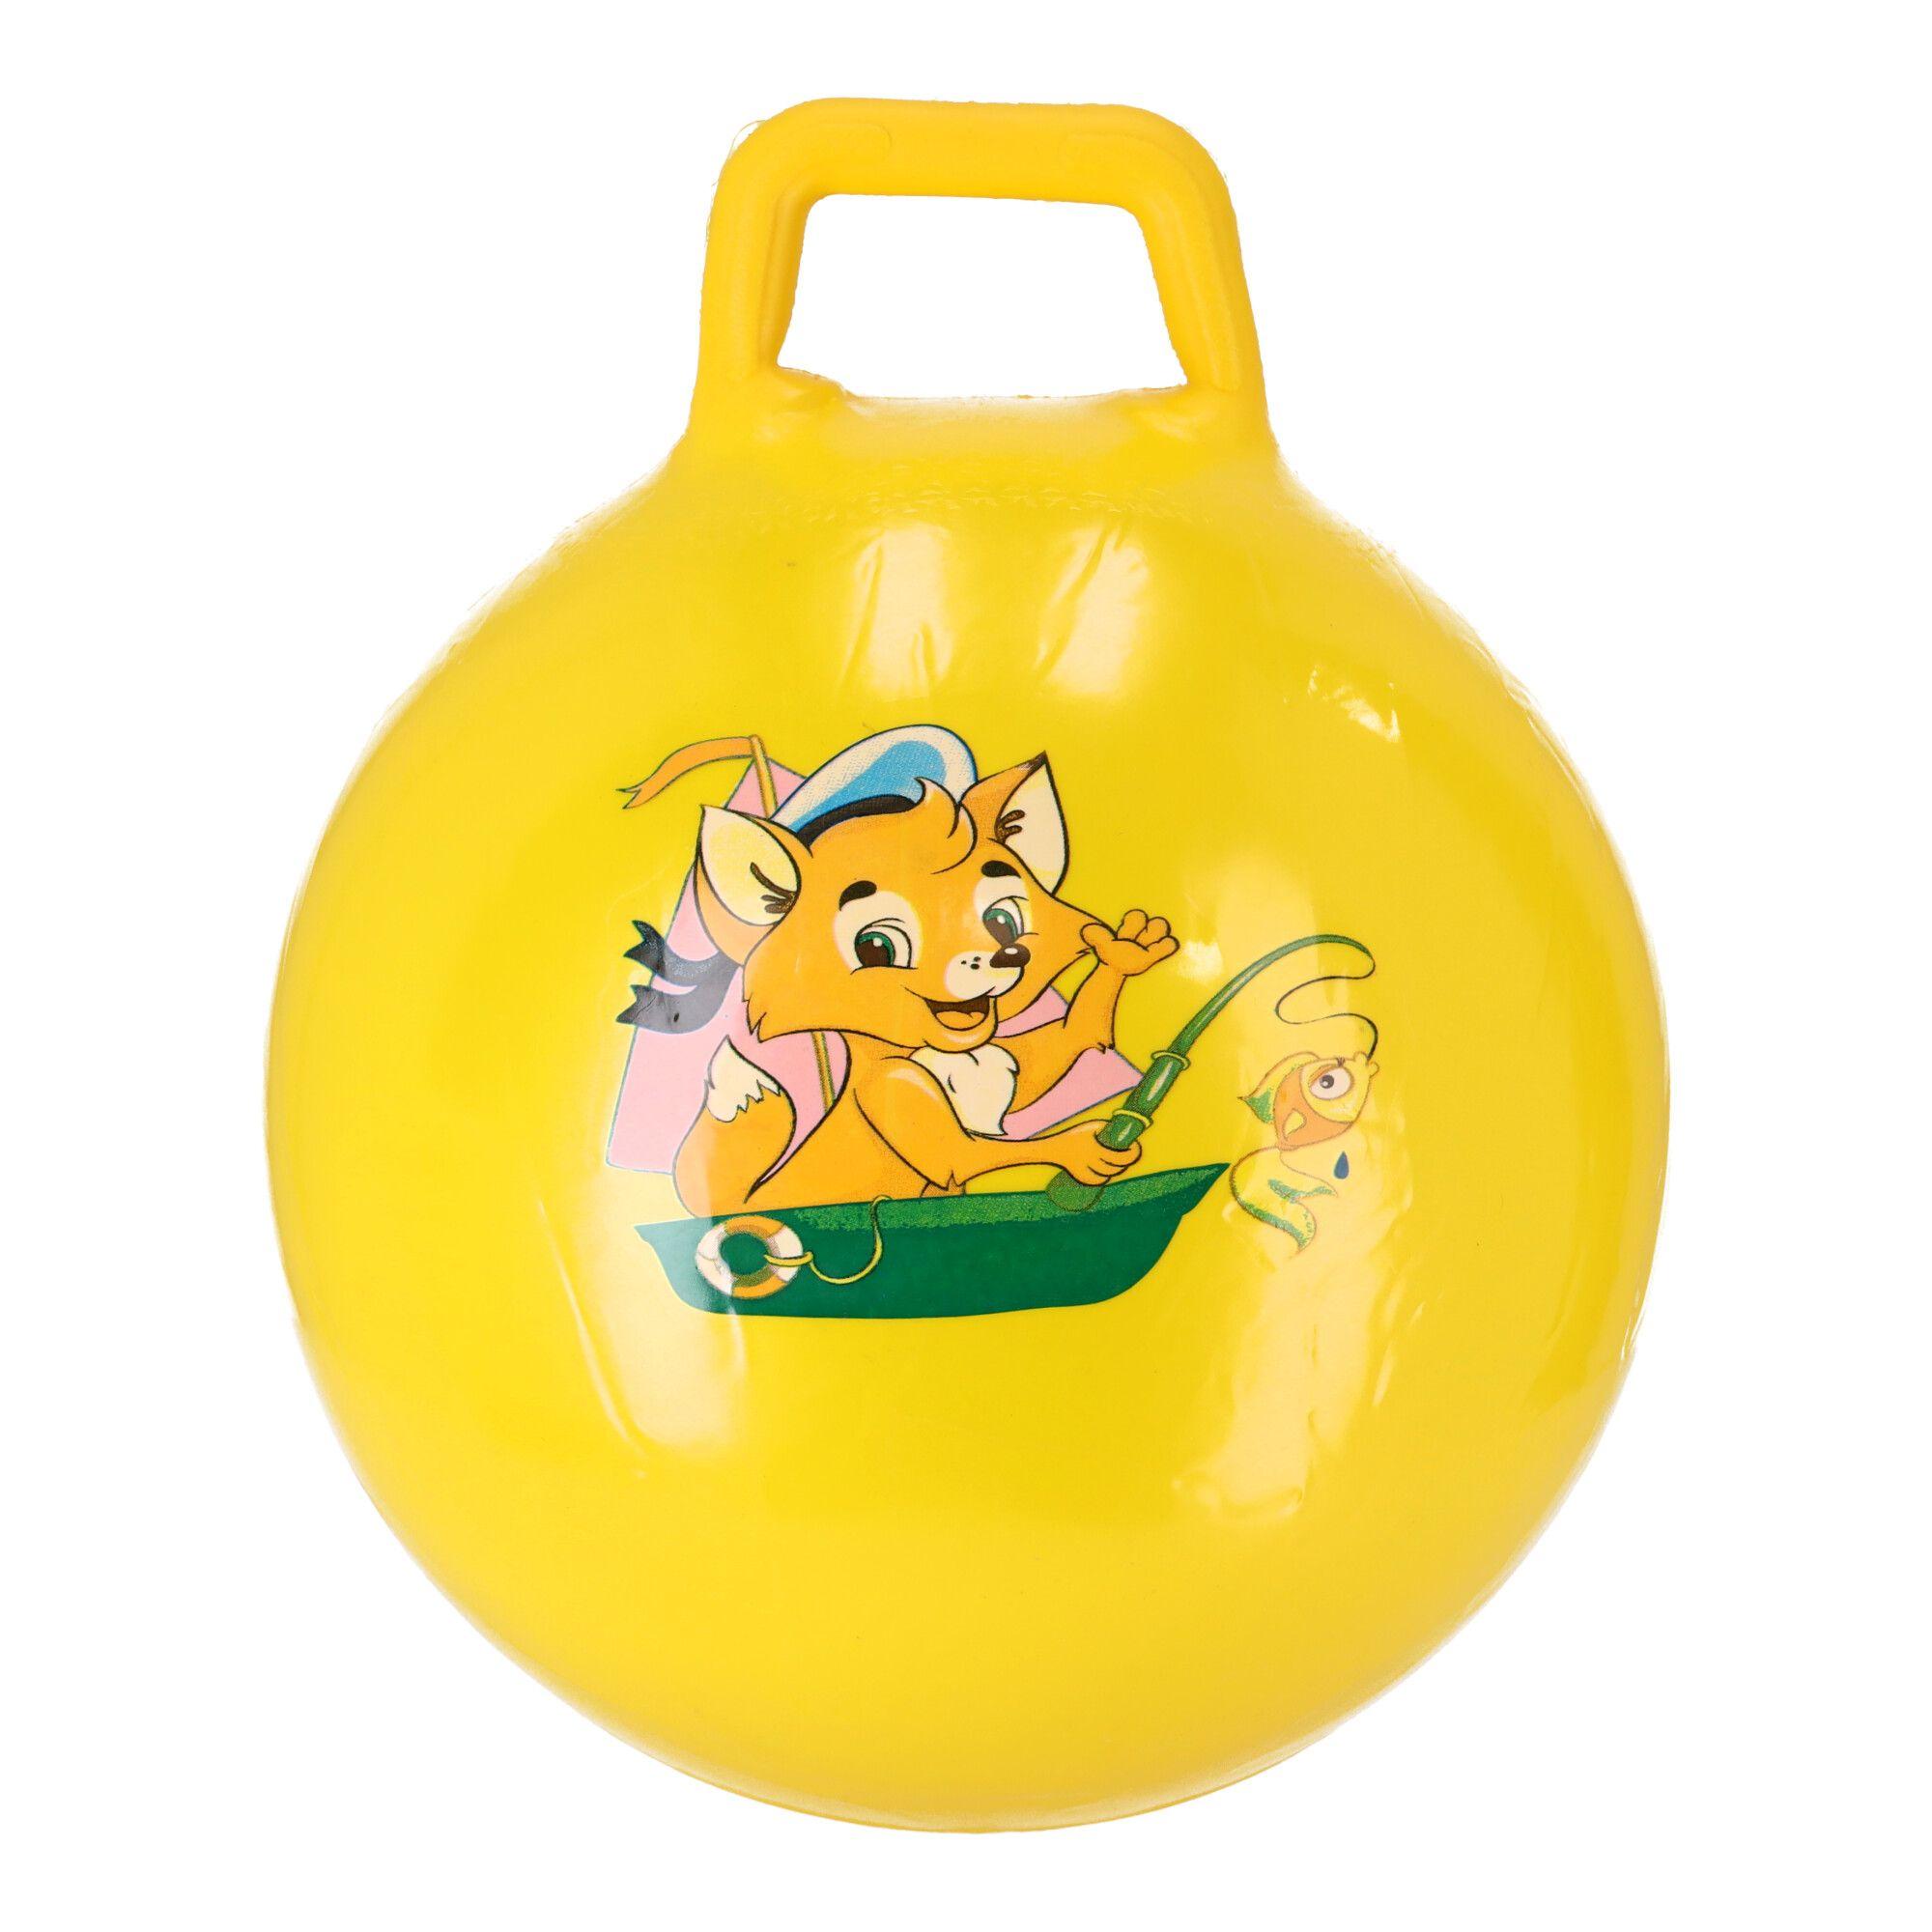 Jumping ball, jumper for children with handles - yellow